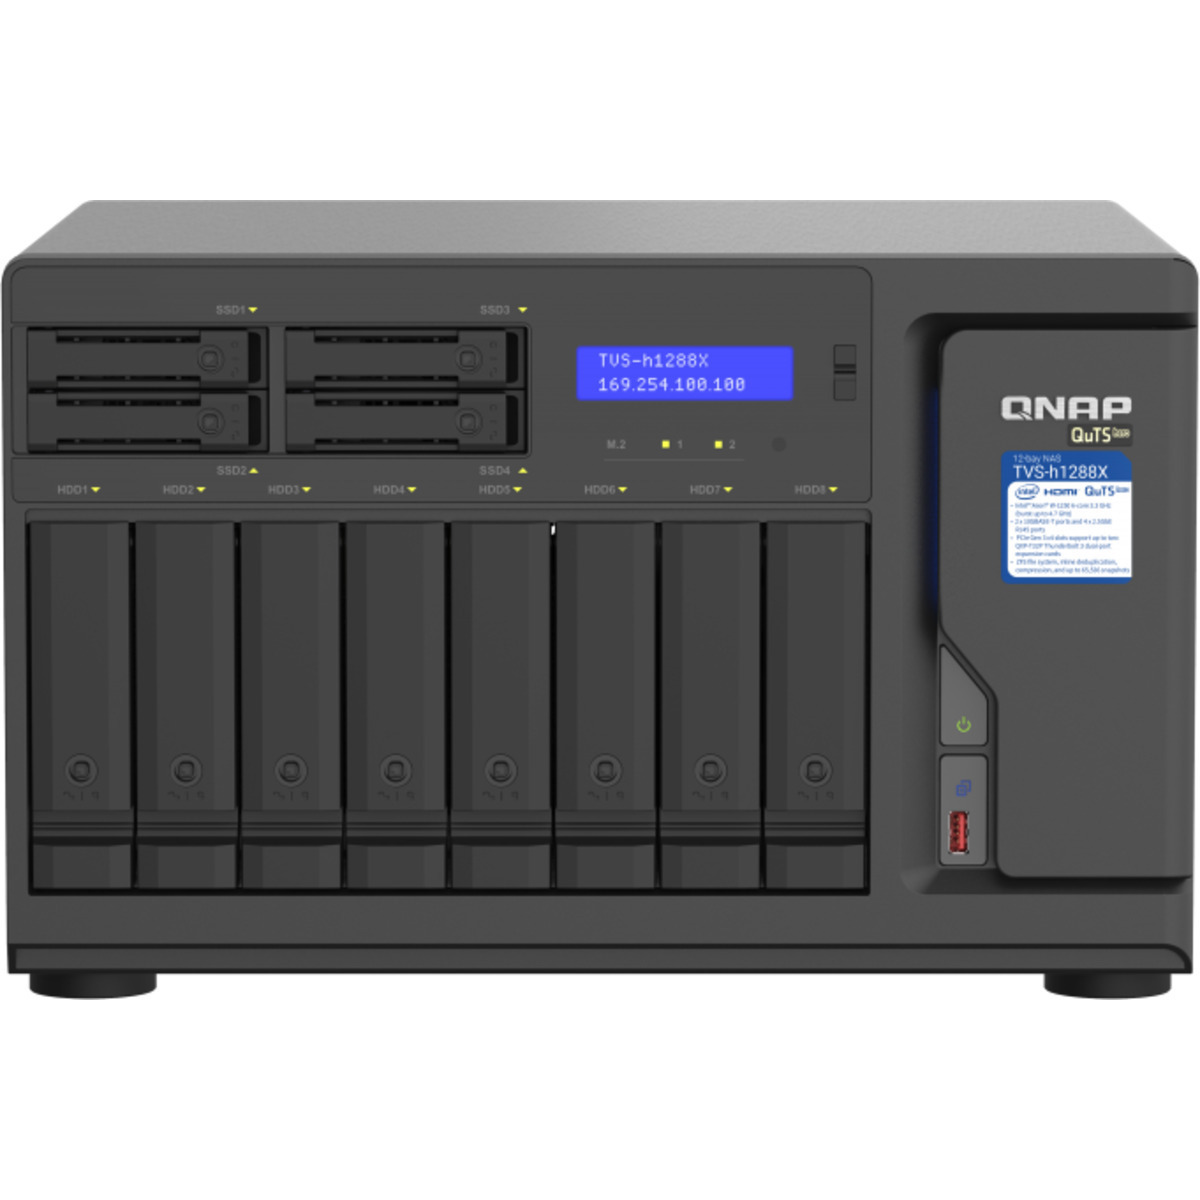 QNAP TVS-h1288X QuTS hero NAS 120tb 8+4-Bay Desktop Multimedia / Power User / Business NAS - Network Attached Storage Device 6x20tb Western Digital Red Pro WD201KFGX 3.5 7200rpm SATA 6Gb/s HDD NAS Class Drives Installed - Burn-In Tested TVS-h1288X QuTS hero NAS